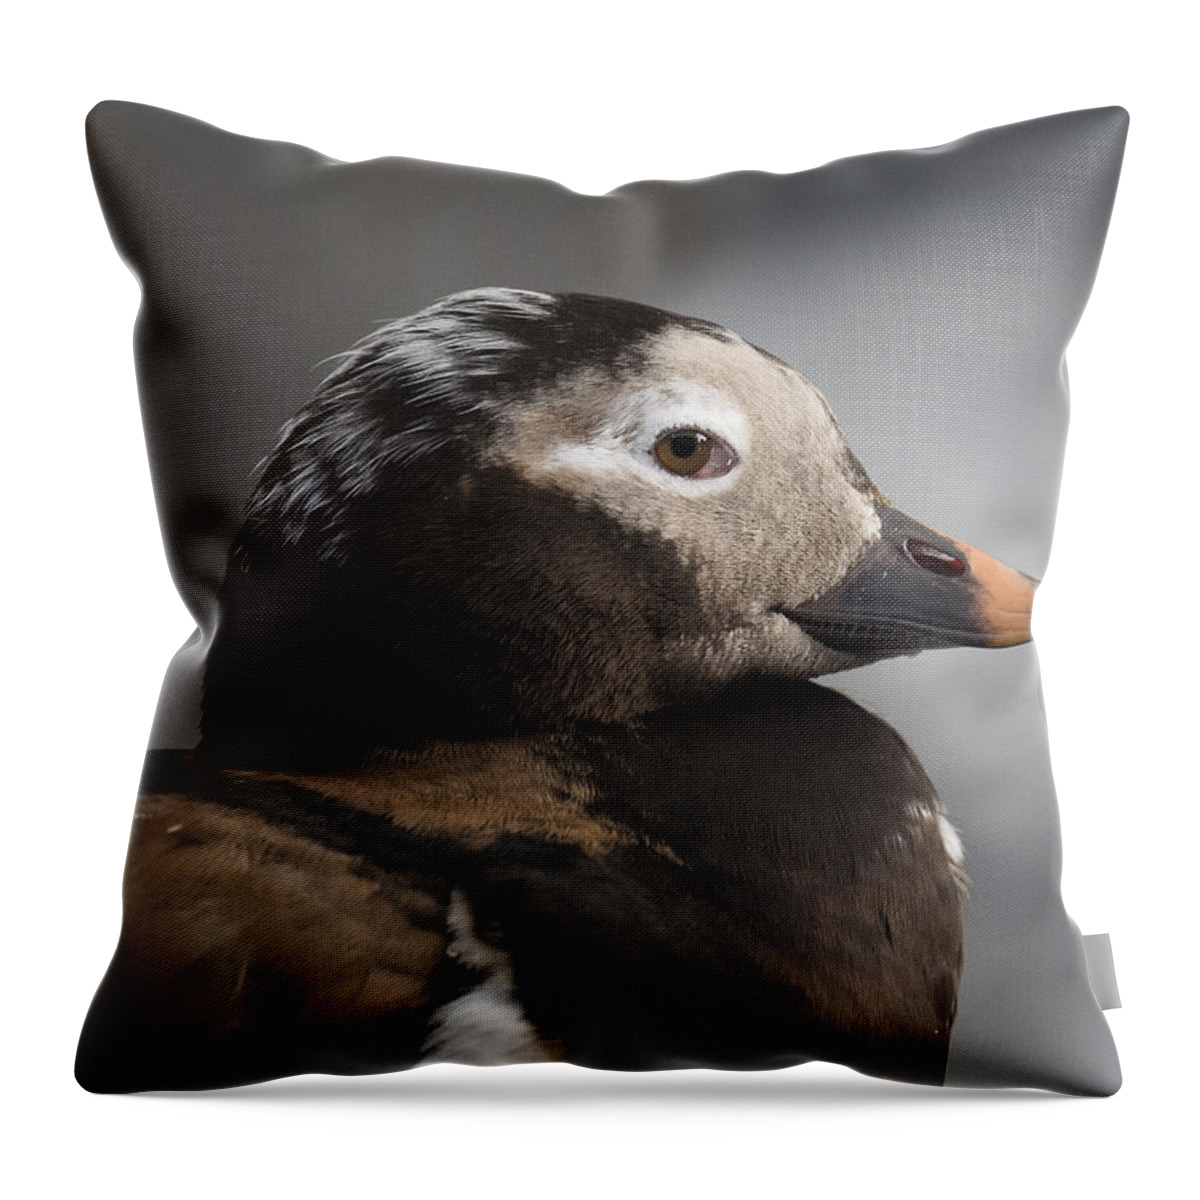 Alaska Throw Pillow featuring the photograph Long-Tailed Stare by Ian Johnson